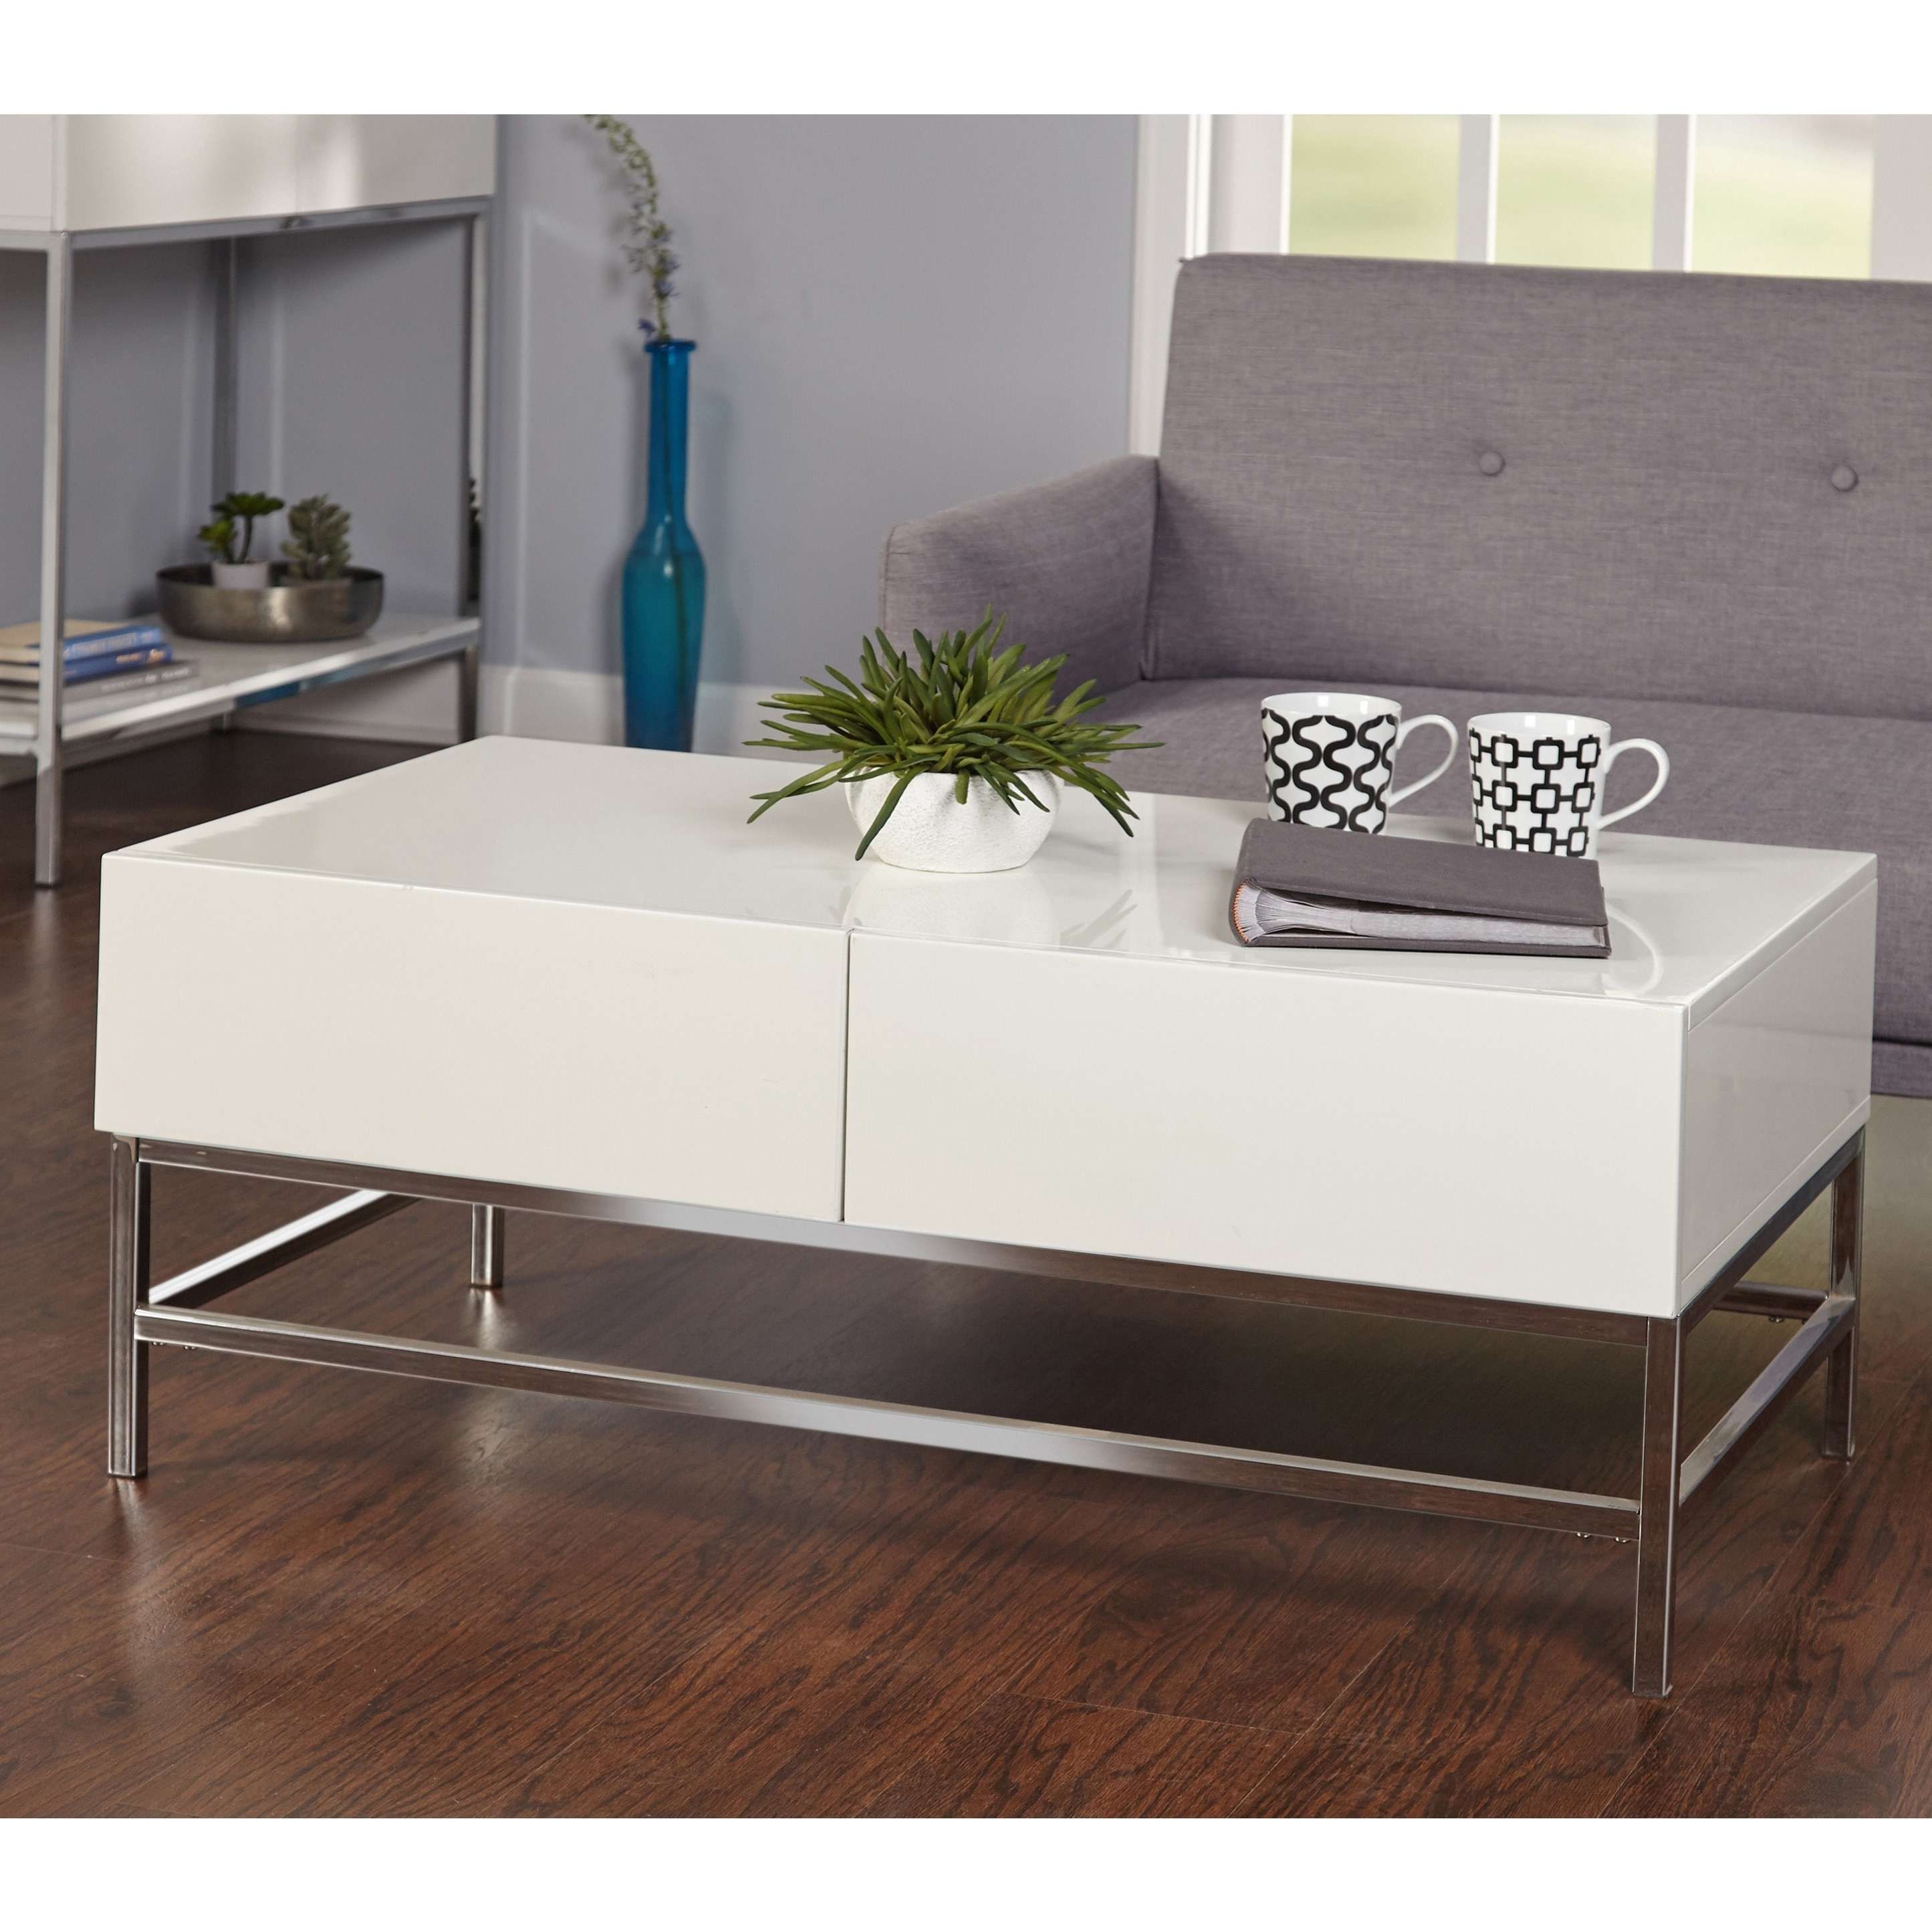 Simple Living White Metal High Gloss Coffee Table – Free Shipping For Best And Newest High Gloss Coffee Tables (Gallery 1 of 20)